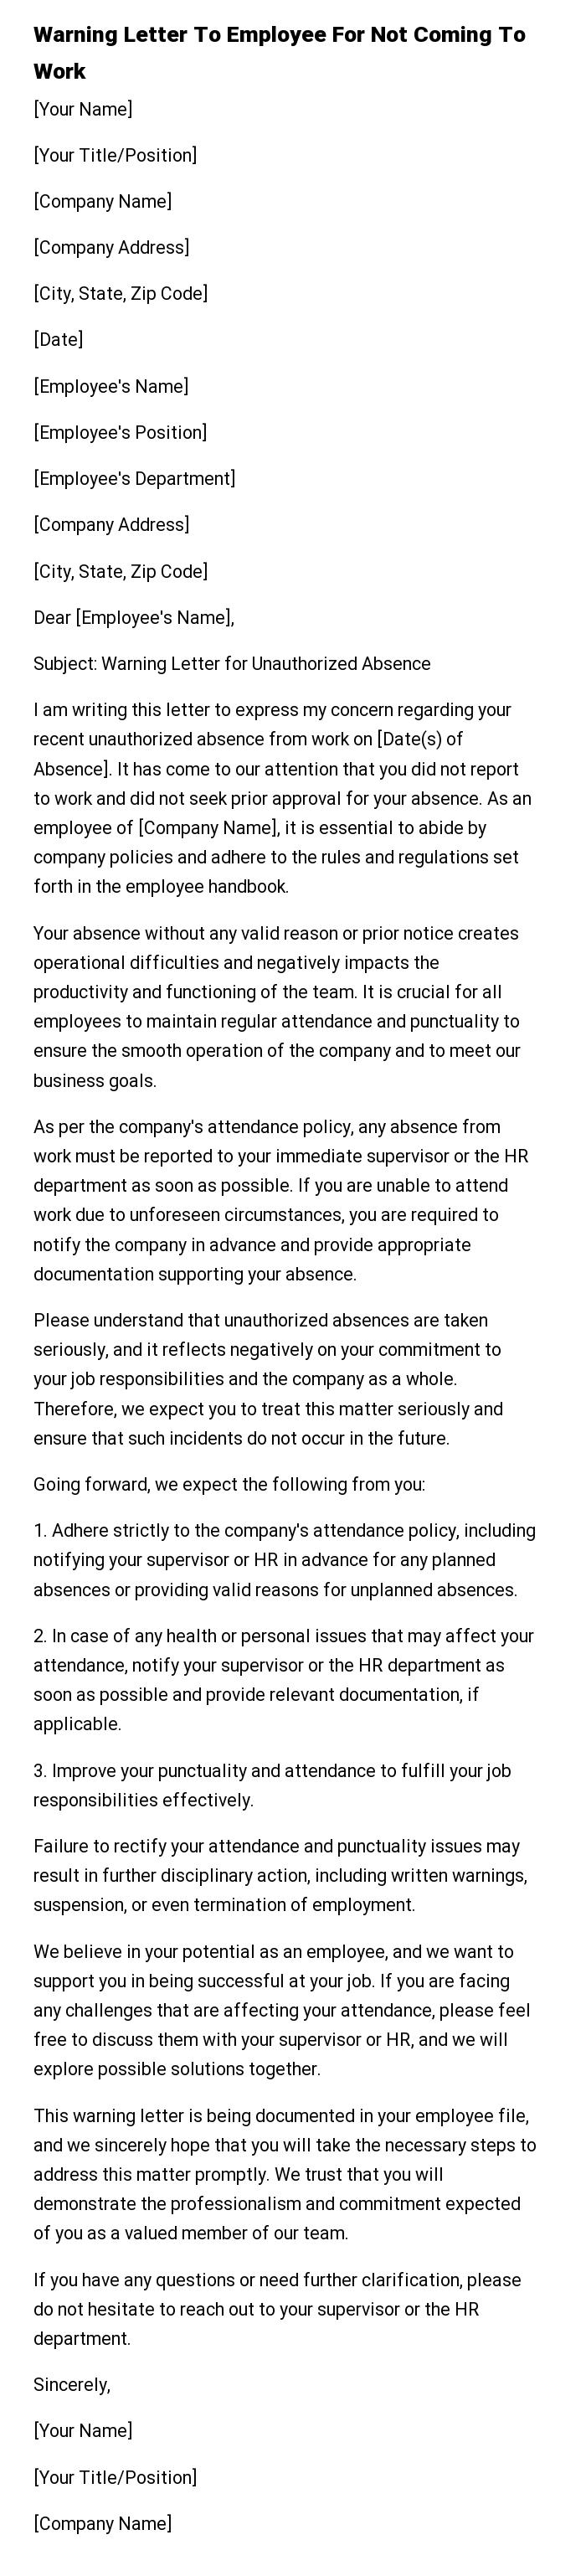 Warning Letter To Employee For Not Coming To Work